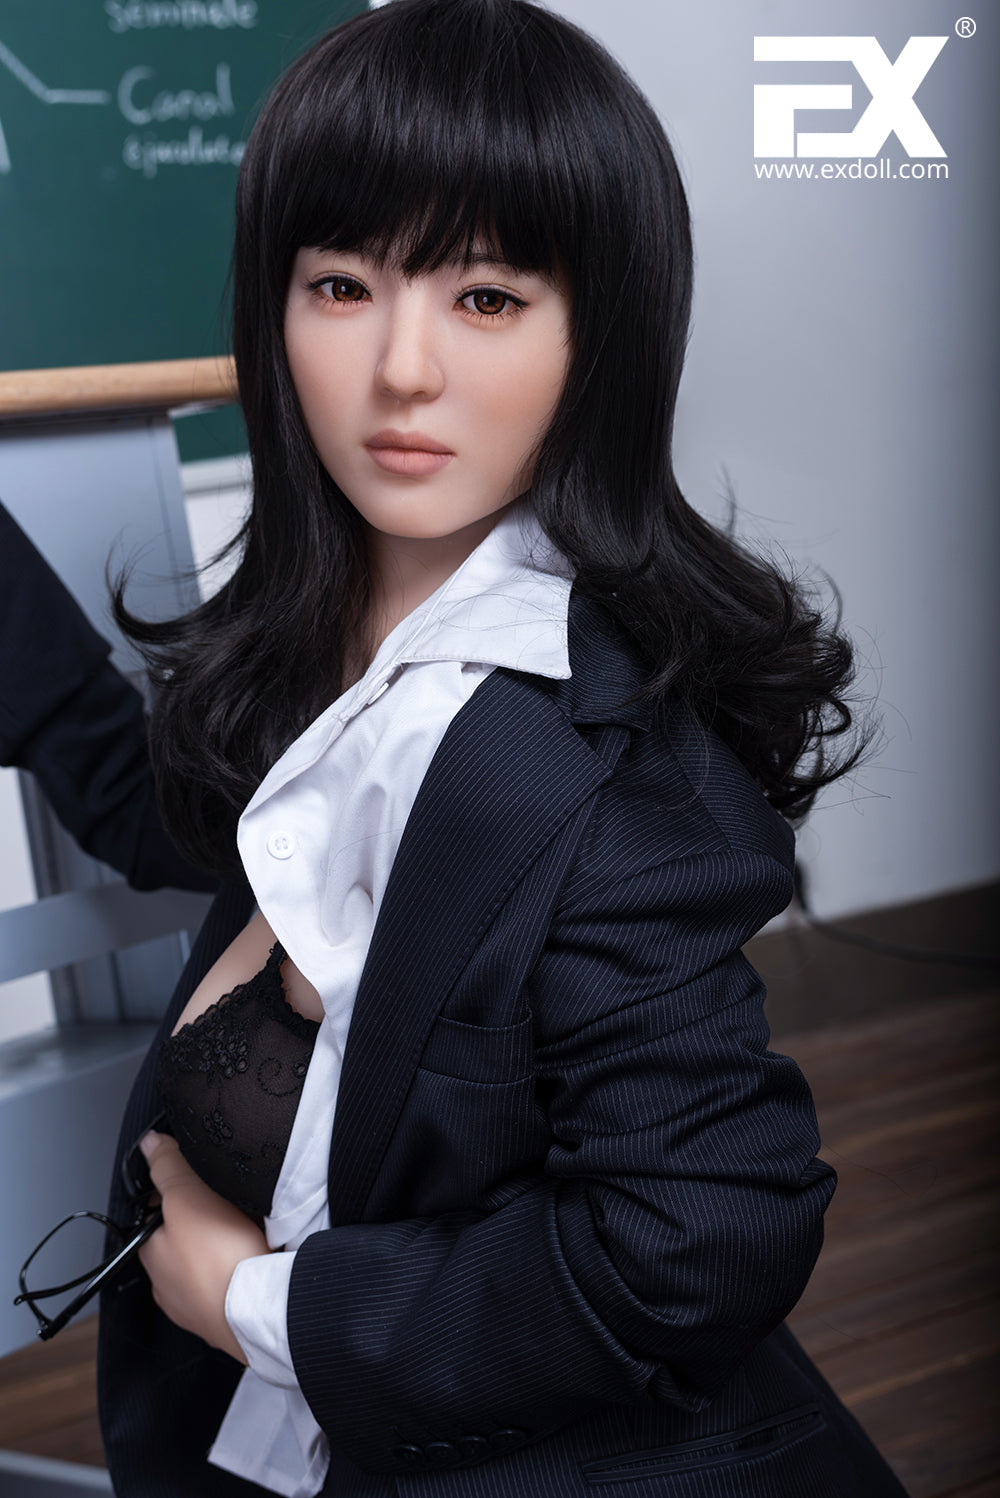 EX Doll Ukiyoe Series 170 cm Silicone - Mo Han | Buy Sex Dolls at DOLLS ACTUALLY